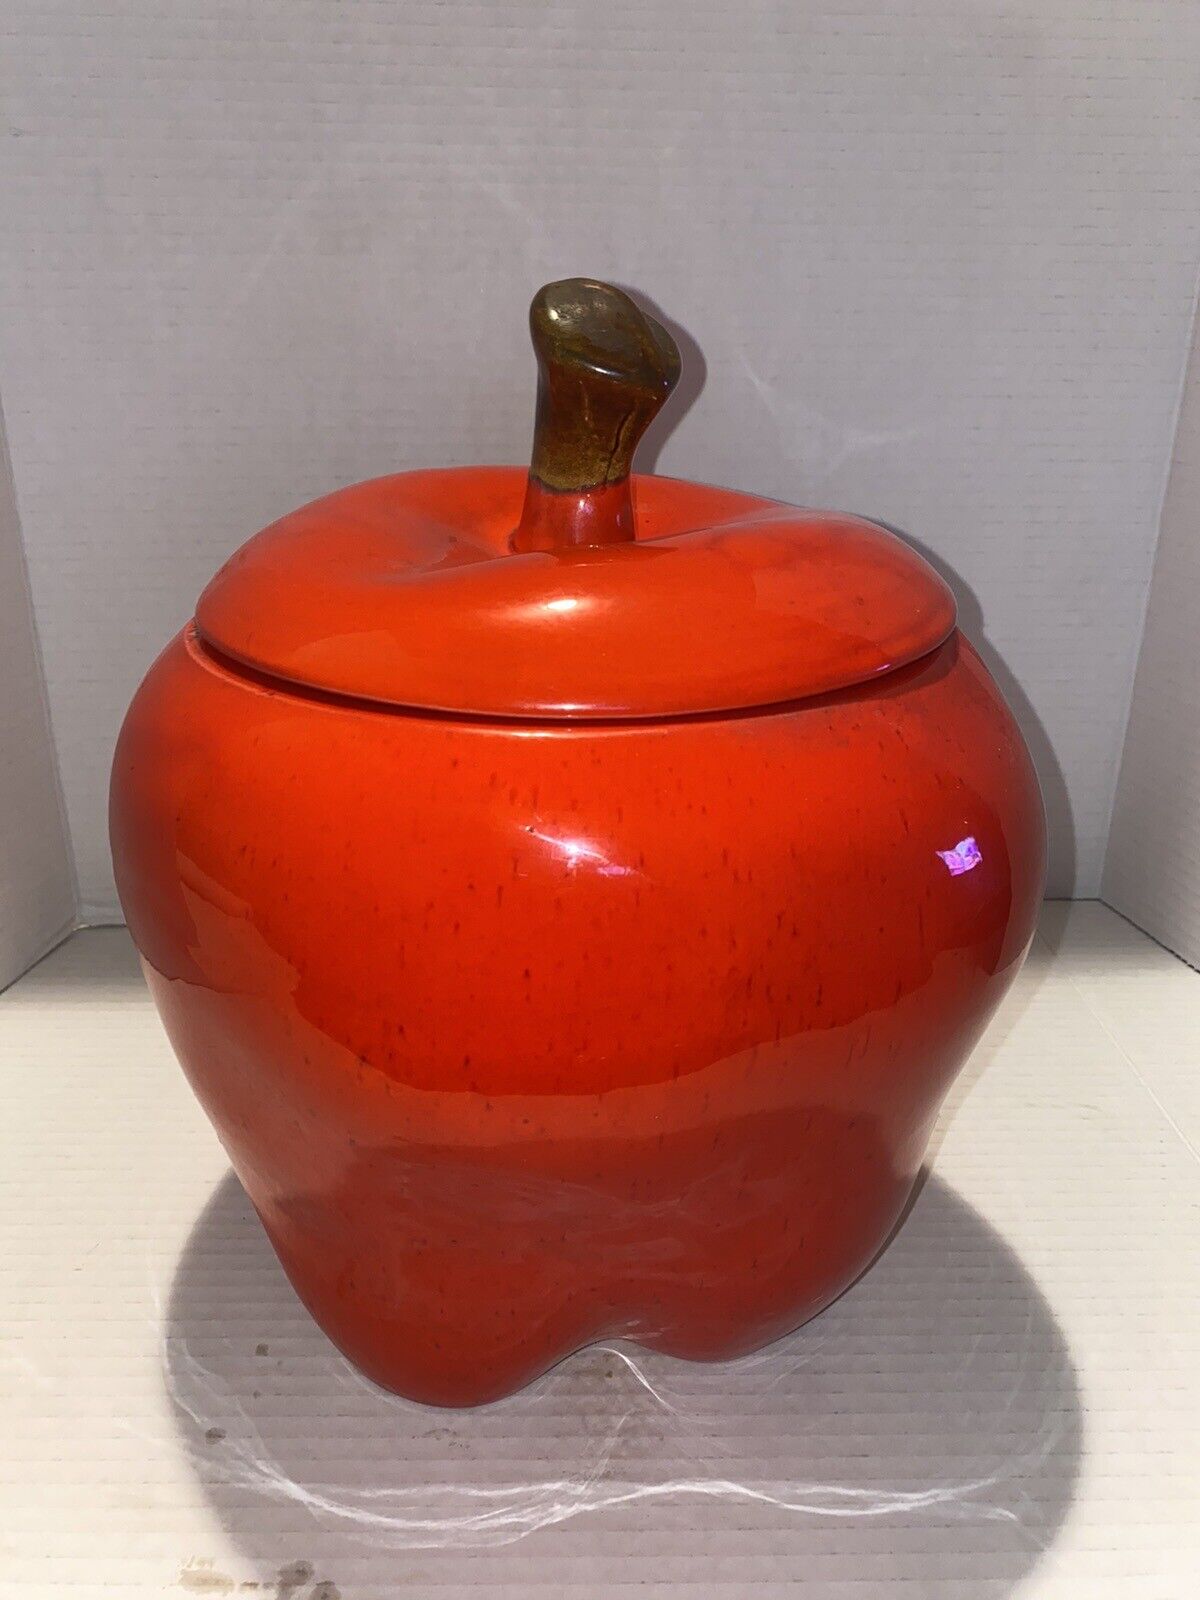 Rare Vtg Large Red Apple Cookie Jar by Doranne of California J 111 USA MADE 